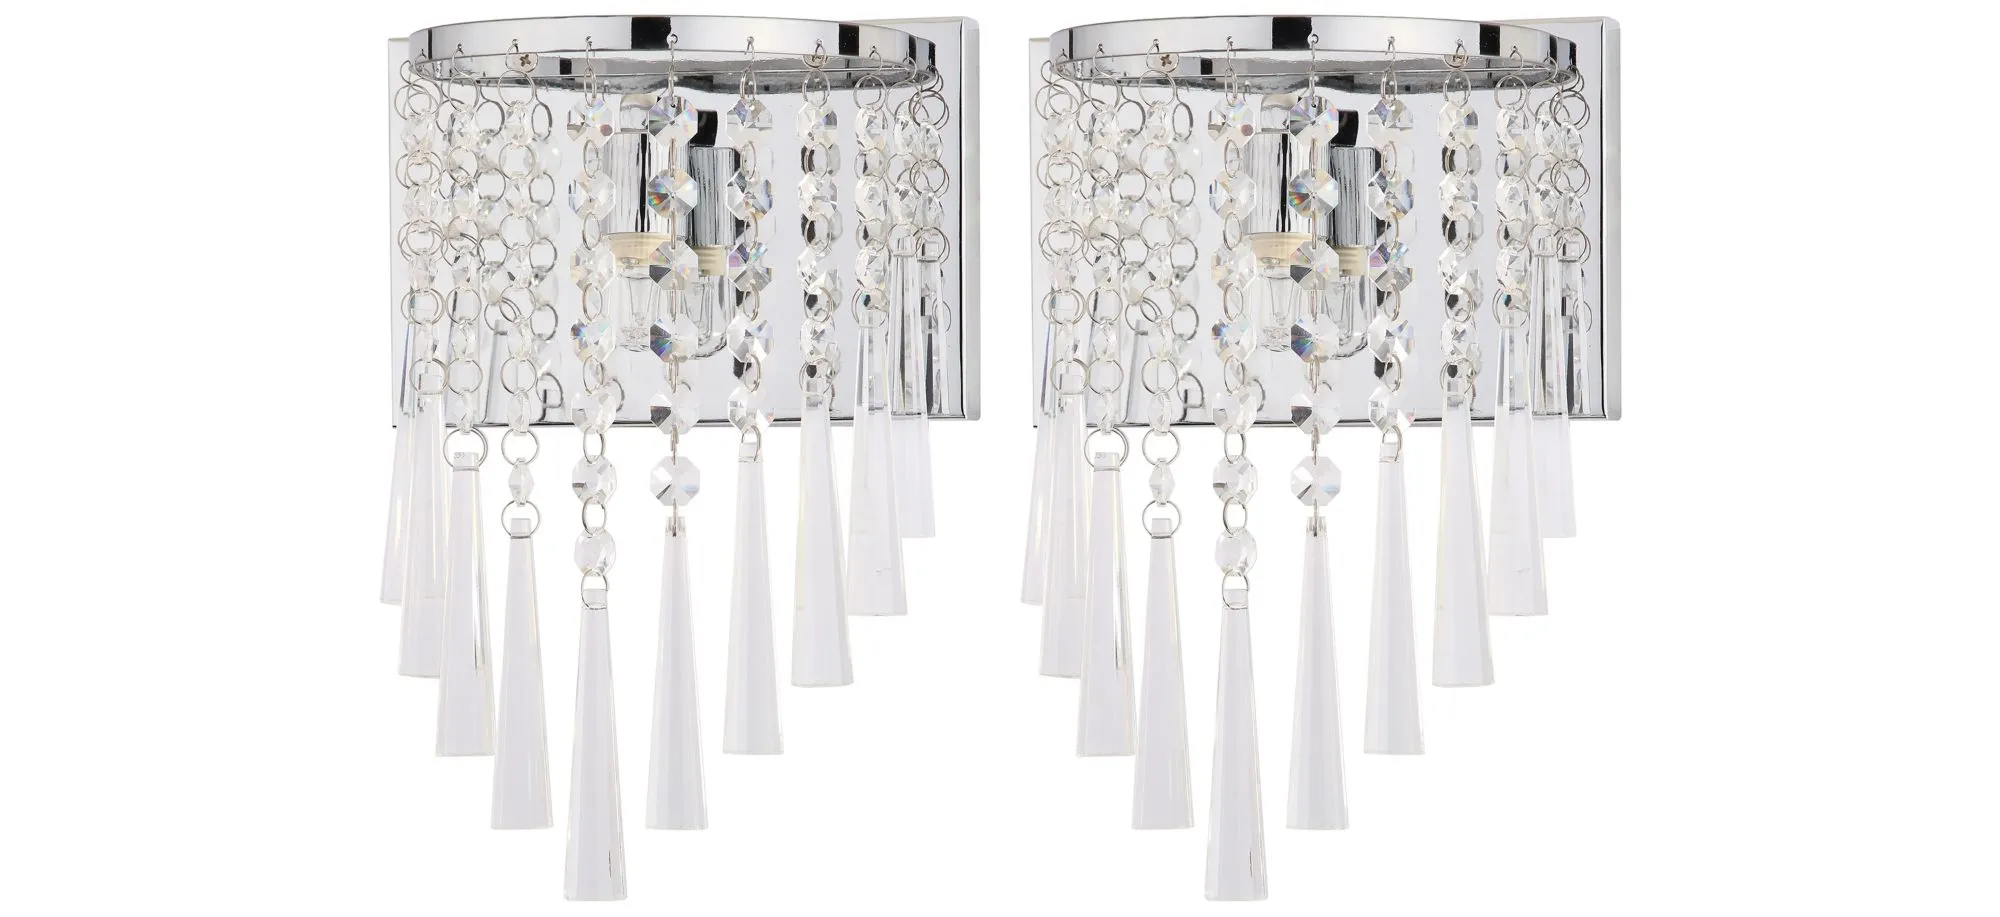 Perri Beaded Wall Sconce in Chrome by Safavieh